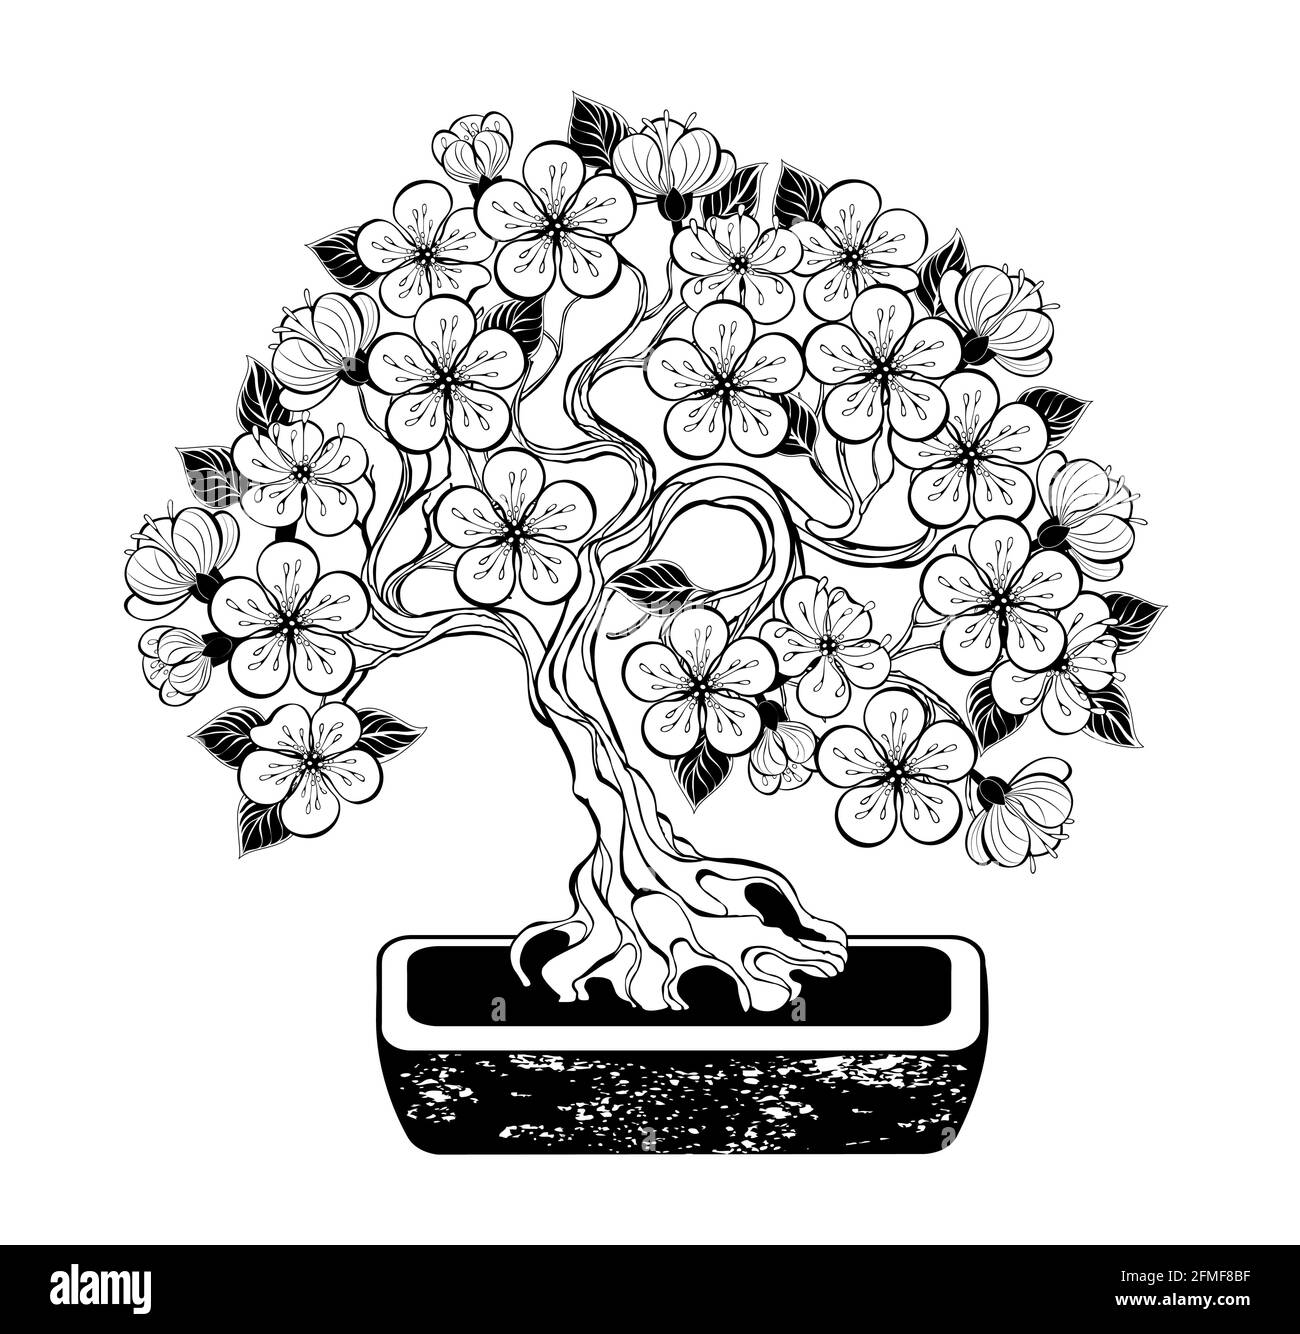 Contour bonsai,  flowering Japanese cherry tree with curved trunk and artistically drawn, contoured, graceful sakura flowers on white background. Colo Stock Vector